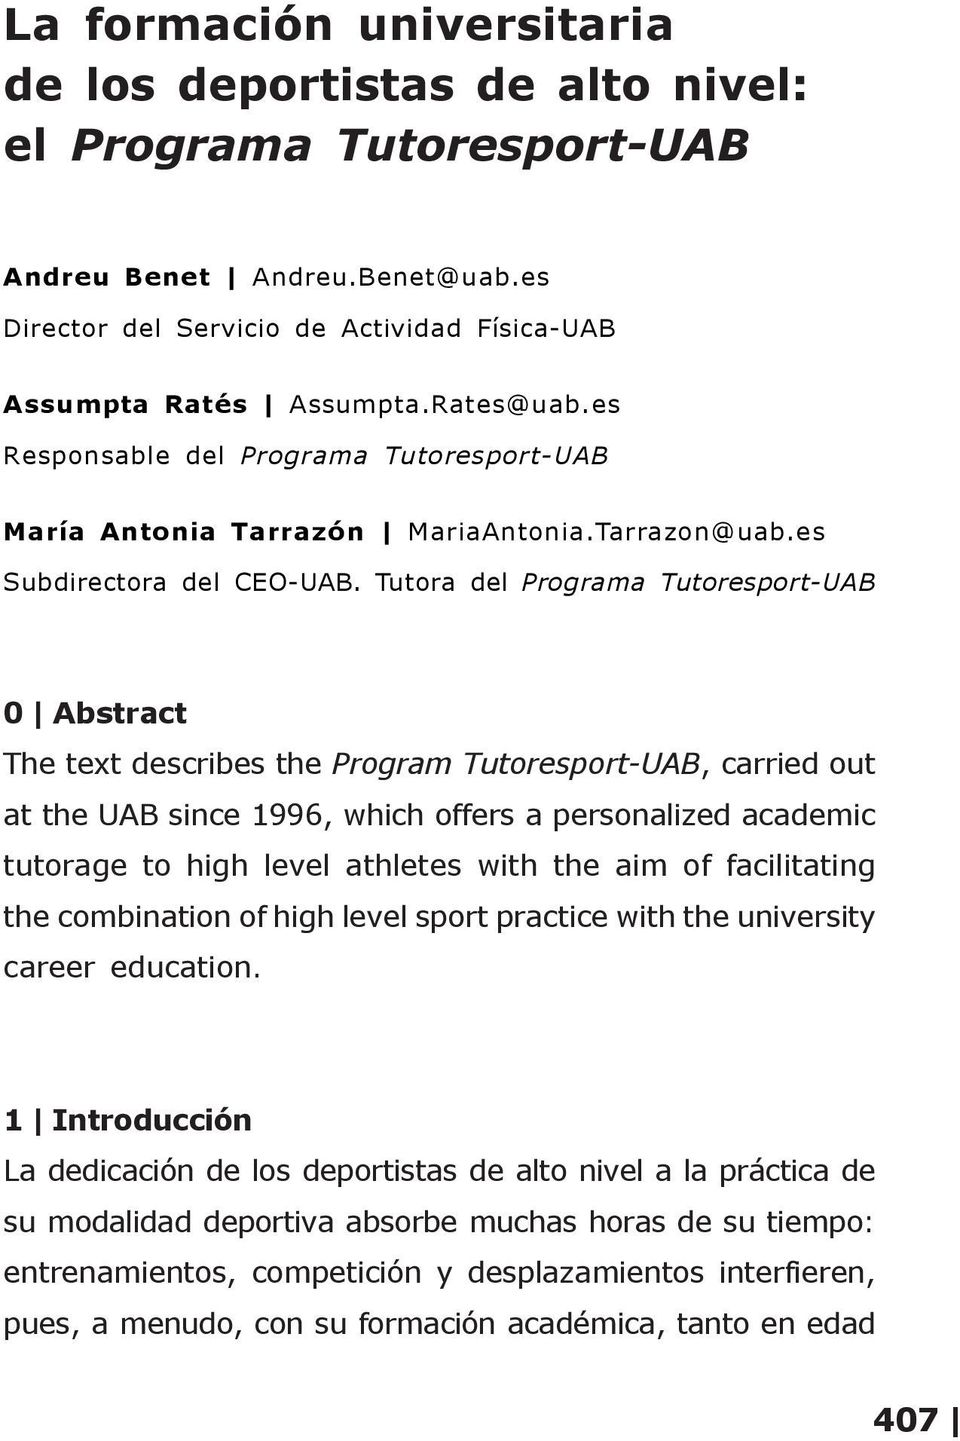 Tutora del Programa Tutoresport-UAB 0 Abstract The text describes the Program Tutoresport-UAB, carried out at the UAB since 1996, which offers a personalized academic tutorage to high level athletes